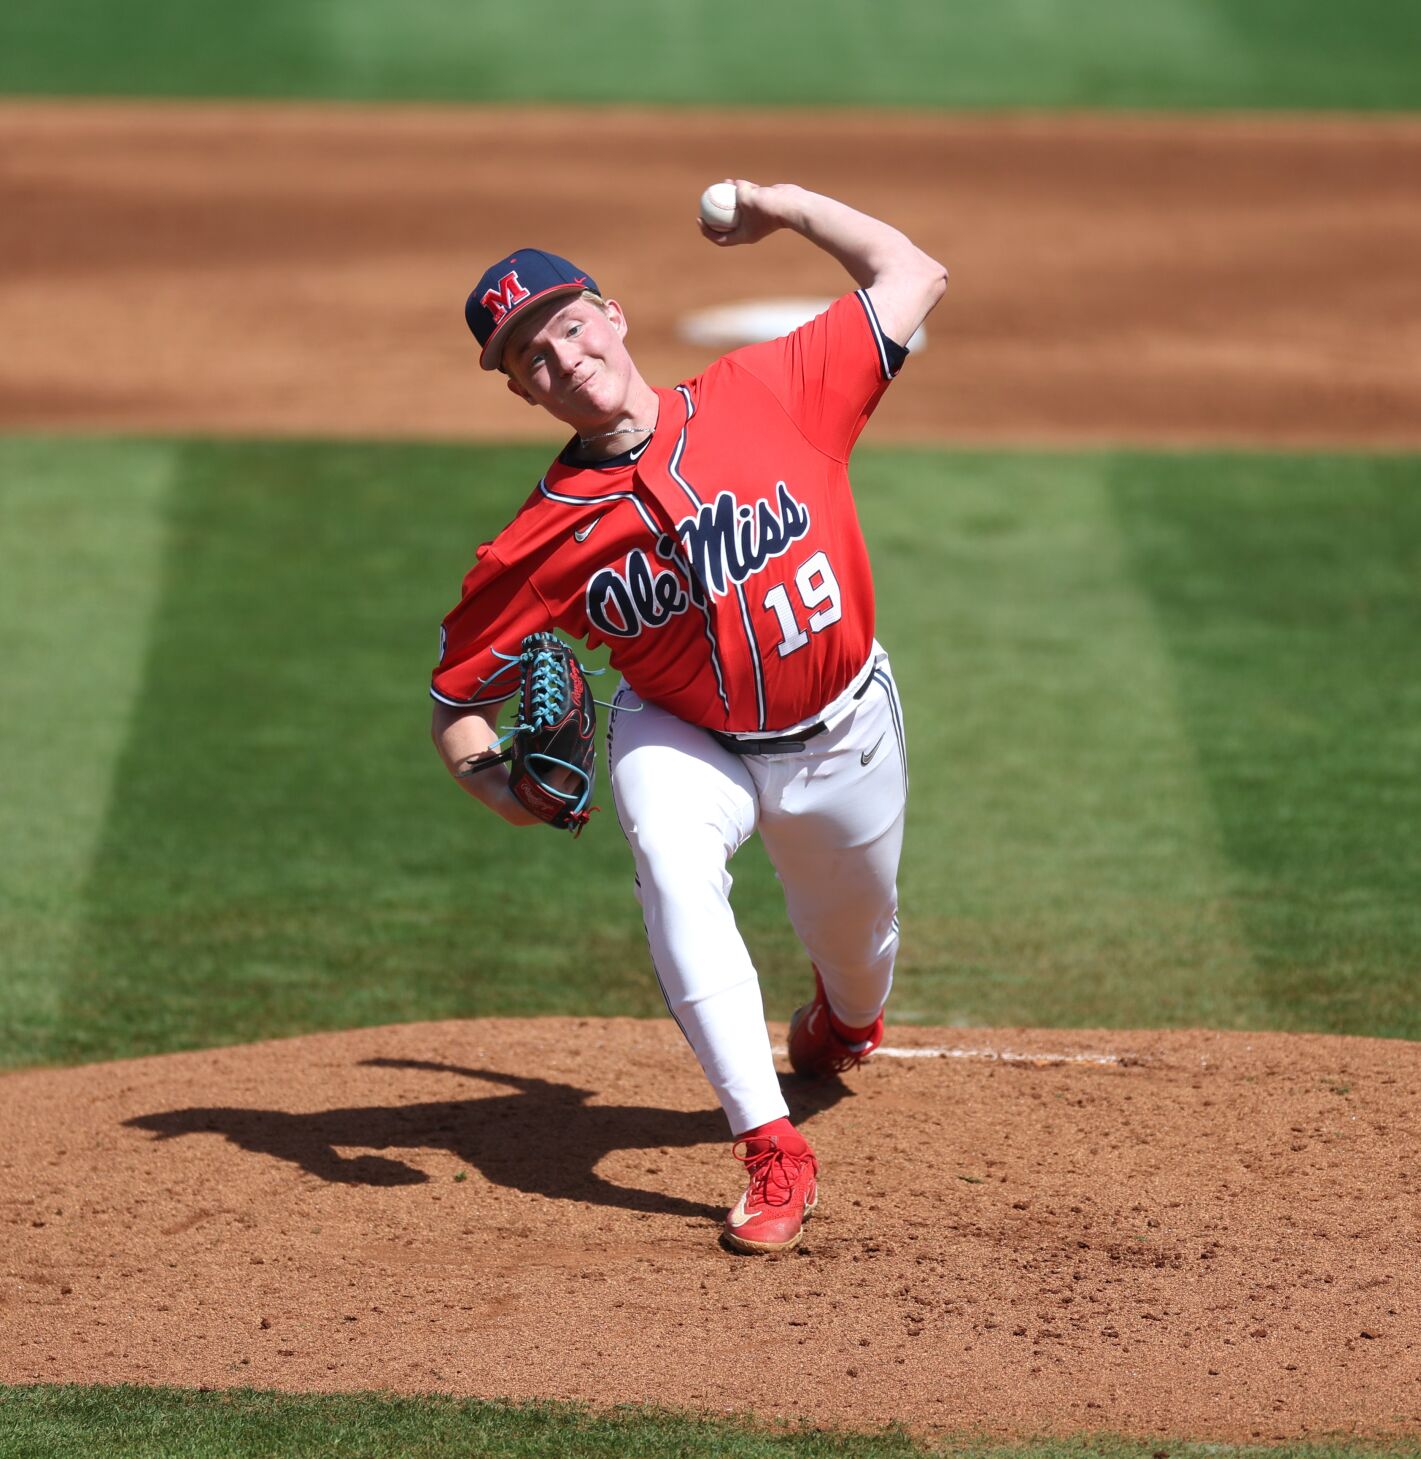 Liam Doyle makes remarkable pitching progress at Ole Miss in SEC competition